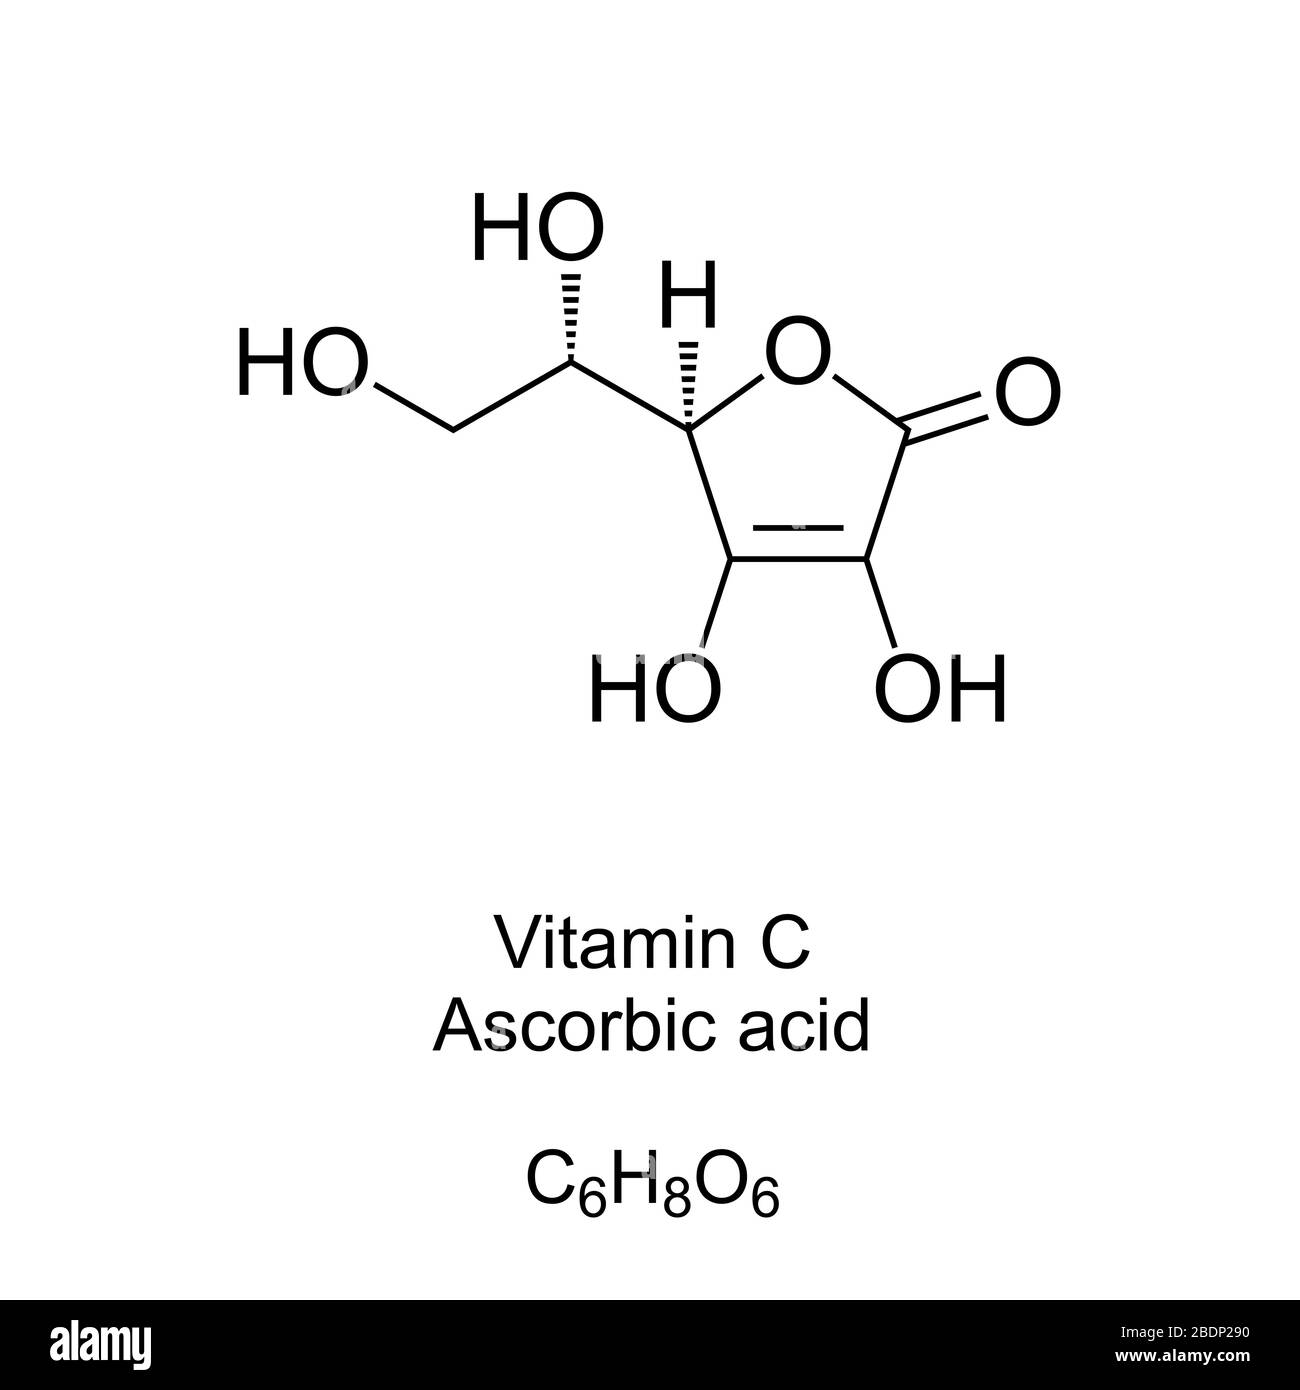 Vitamin C skeletal formula and molecular structure. Ascorbic acid, also known as ascorbate, a vitamin found in various foods. Stock Photo